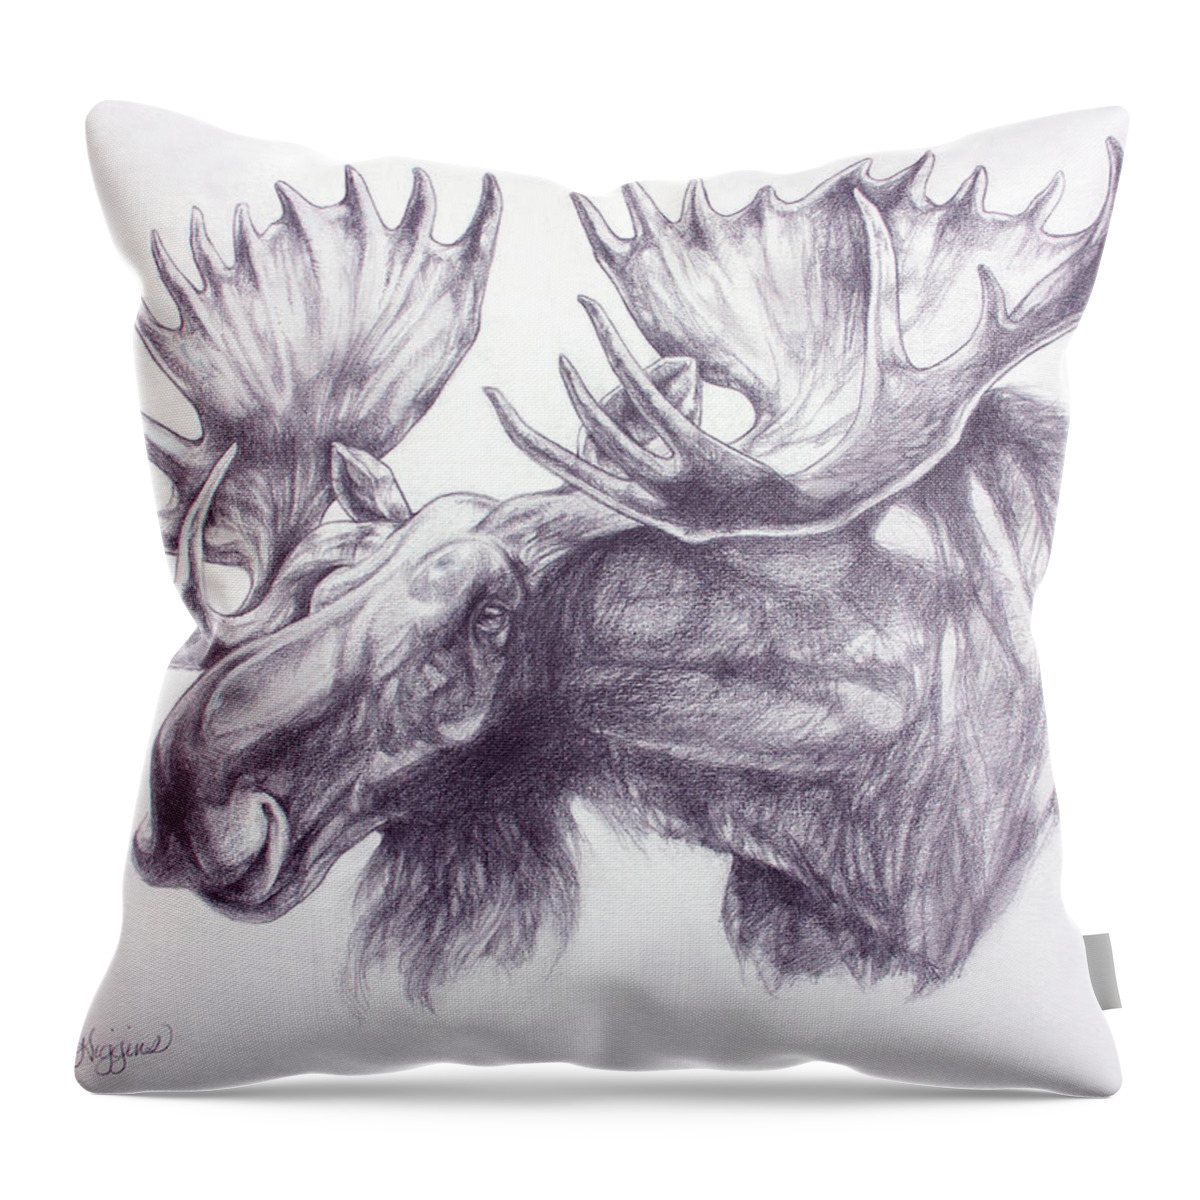 Moose Throw Pillow featuring the drawing Maligne Lake Moose by Derrick Higgins